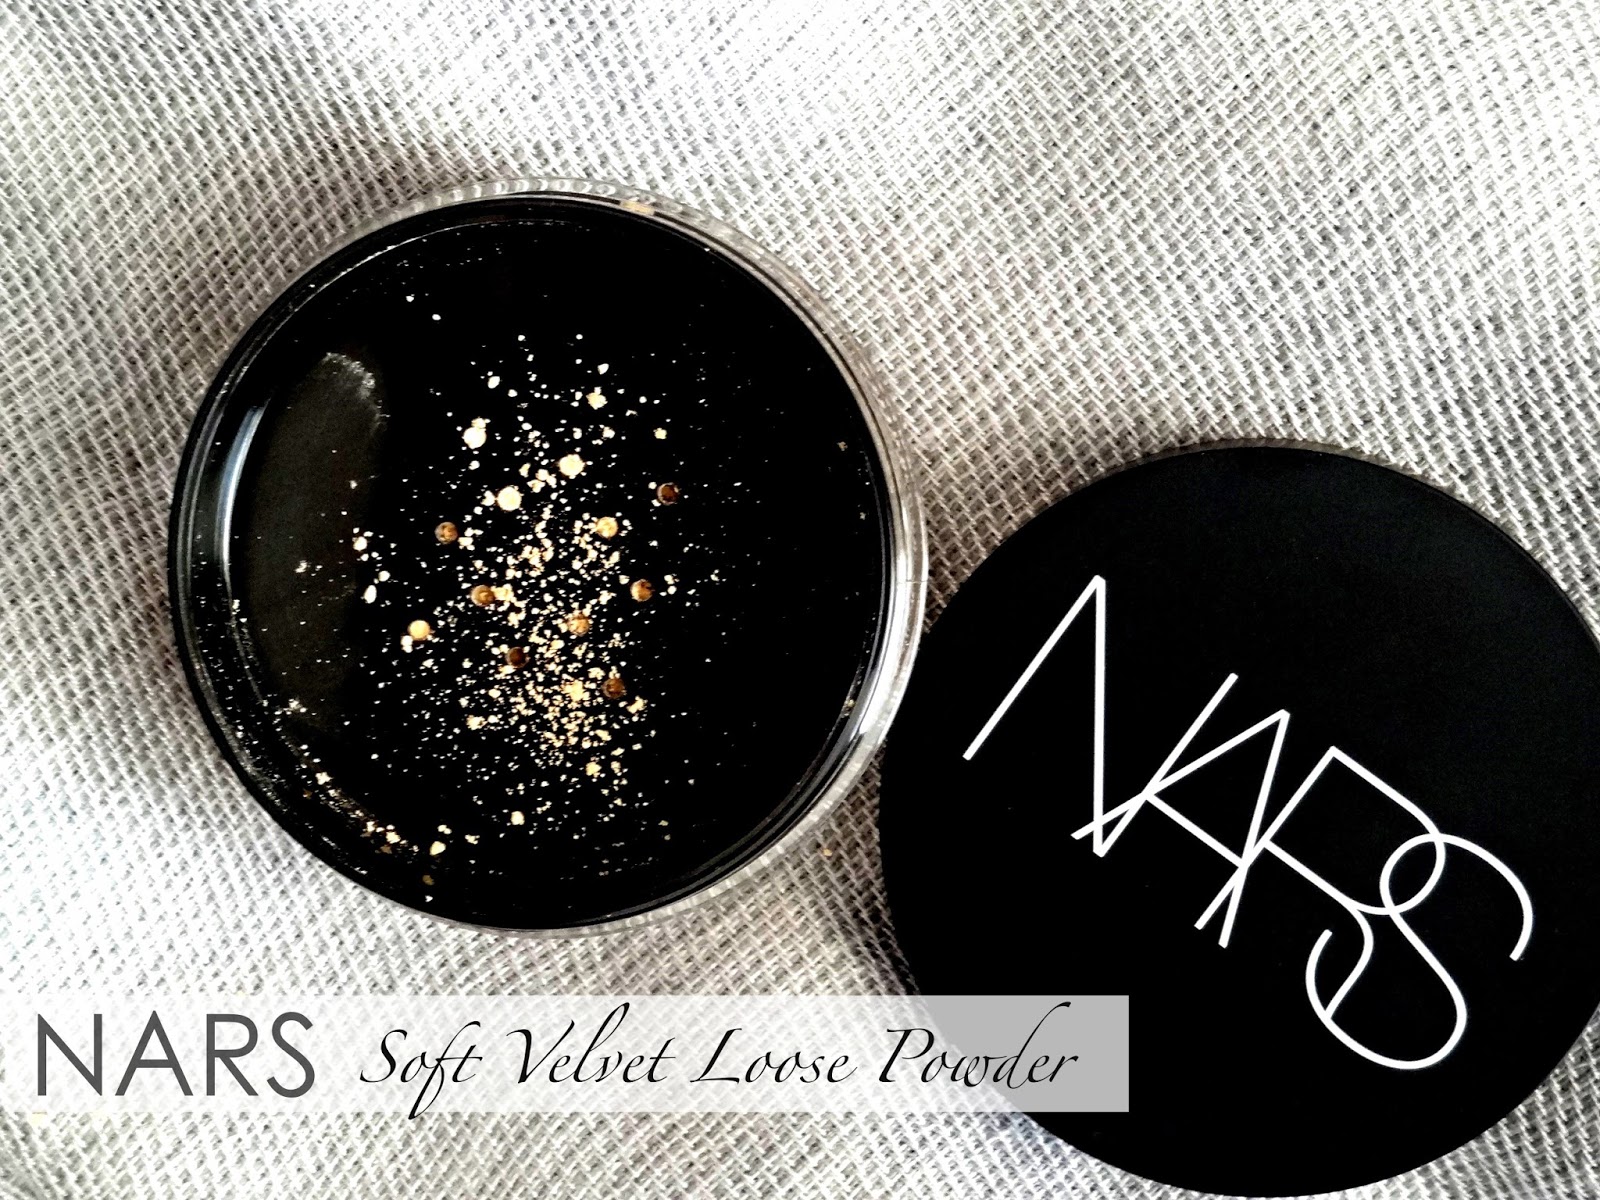 NARS Soft Velvet Loose Powder in Eden Review, Photos & Swatches